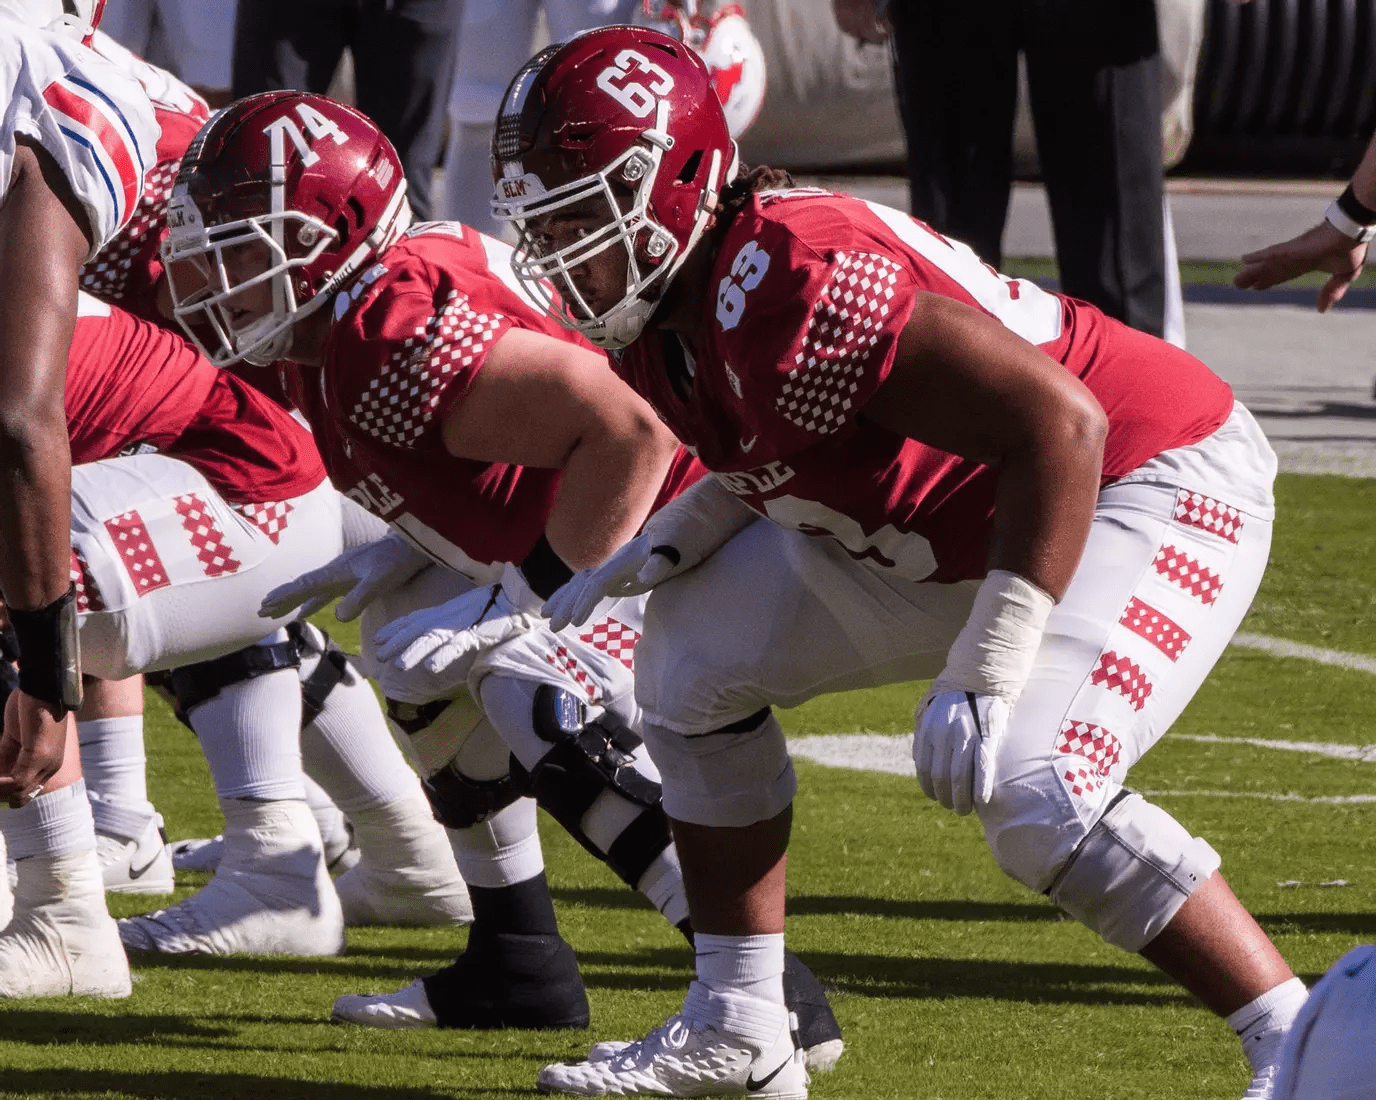 Isaac Moore is a very experienced OT at Temple University with good potential at the next level. Hula Bowl scout, Bryan Ault breaks down Moore's strengths and weaknesses as an NFL Prospect in this article.